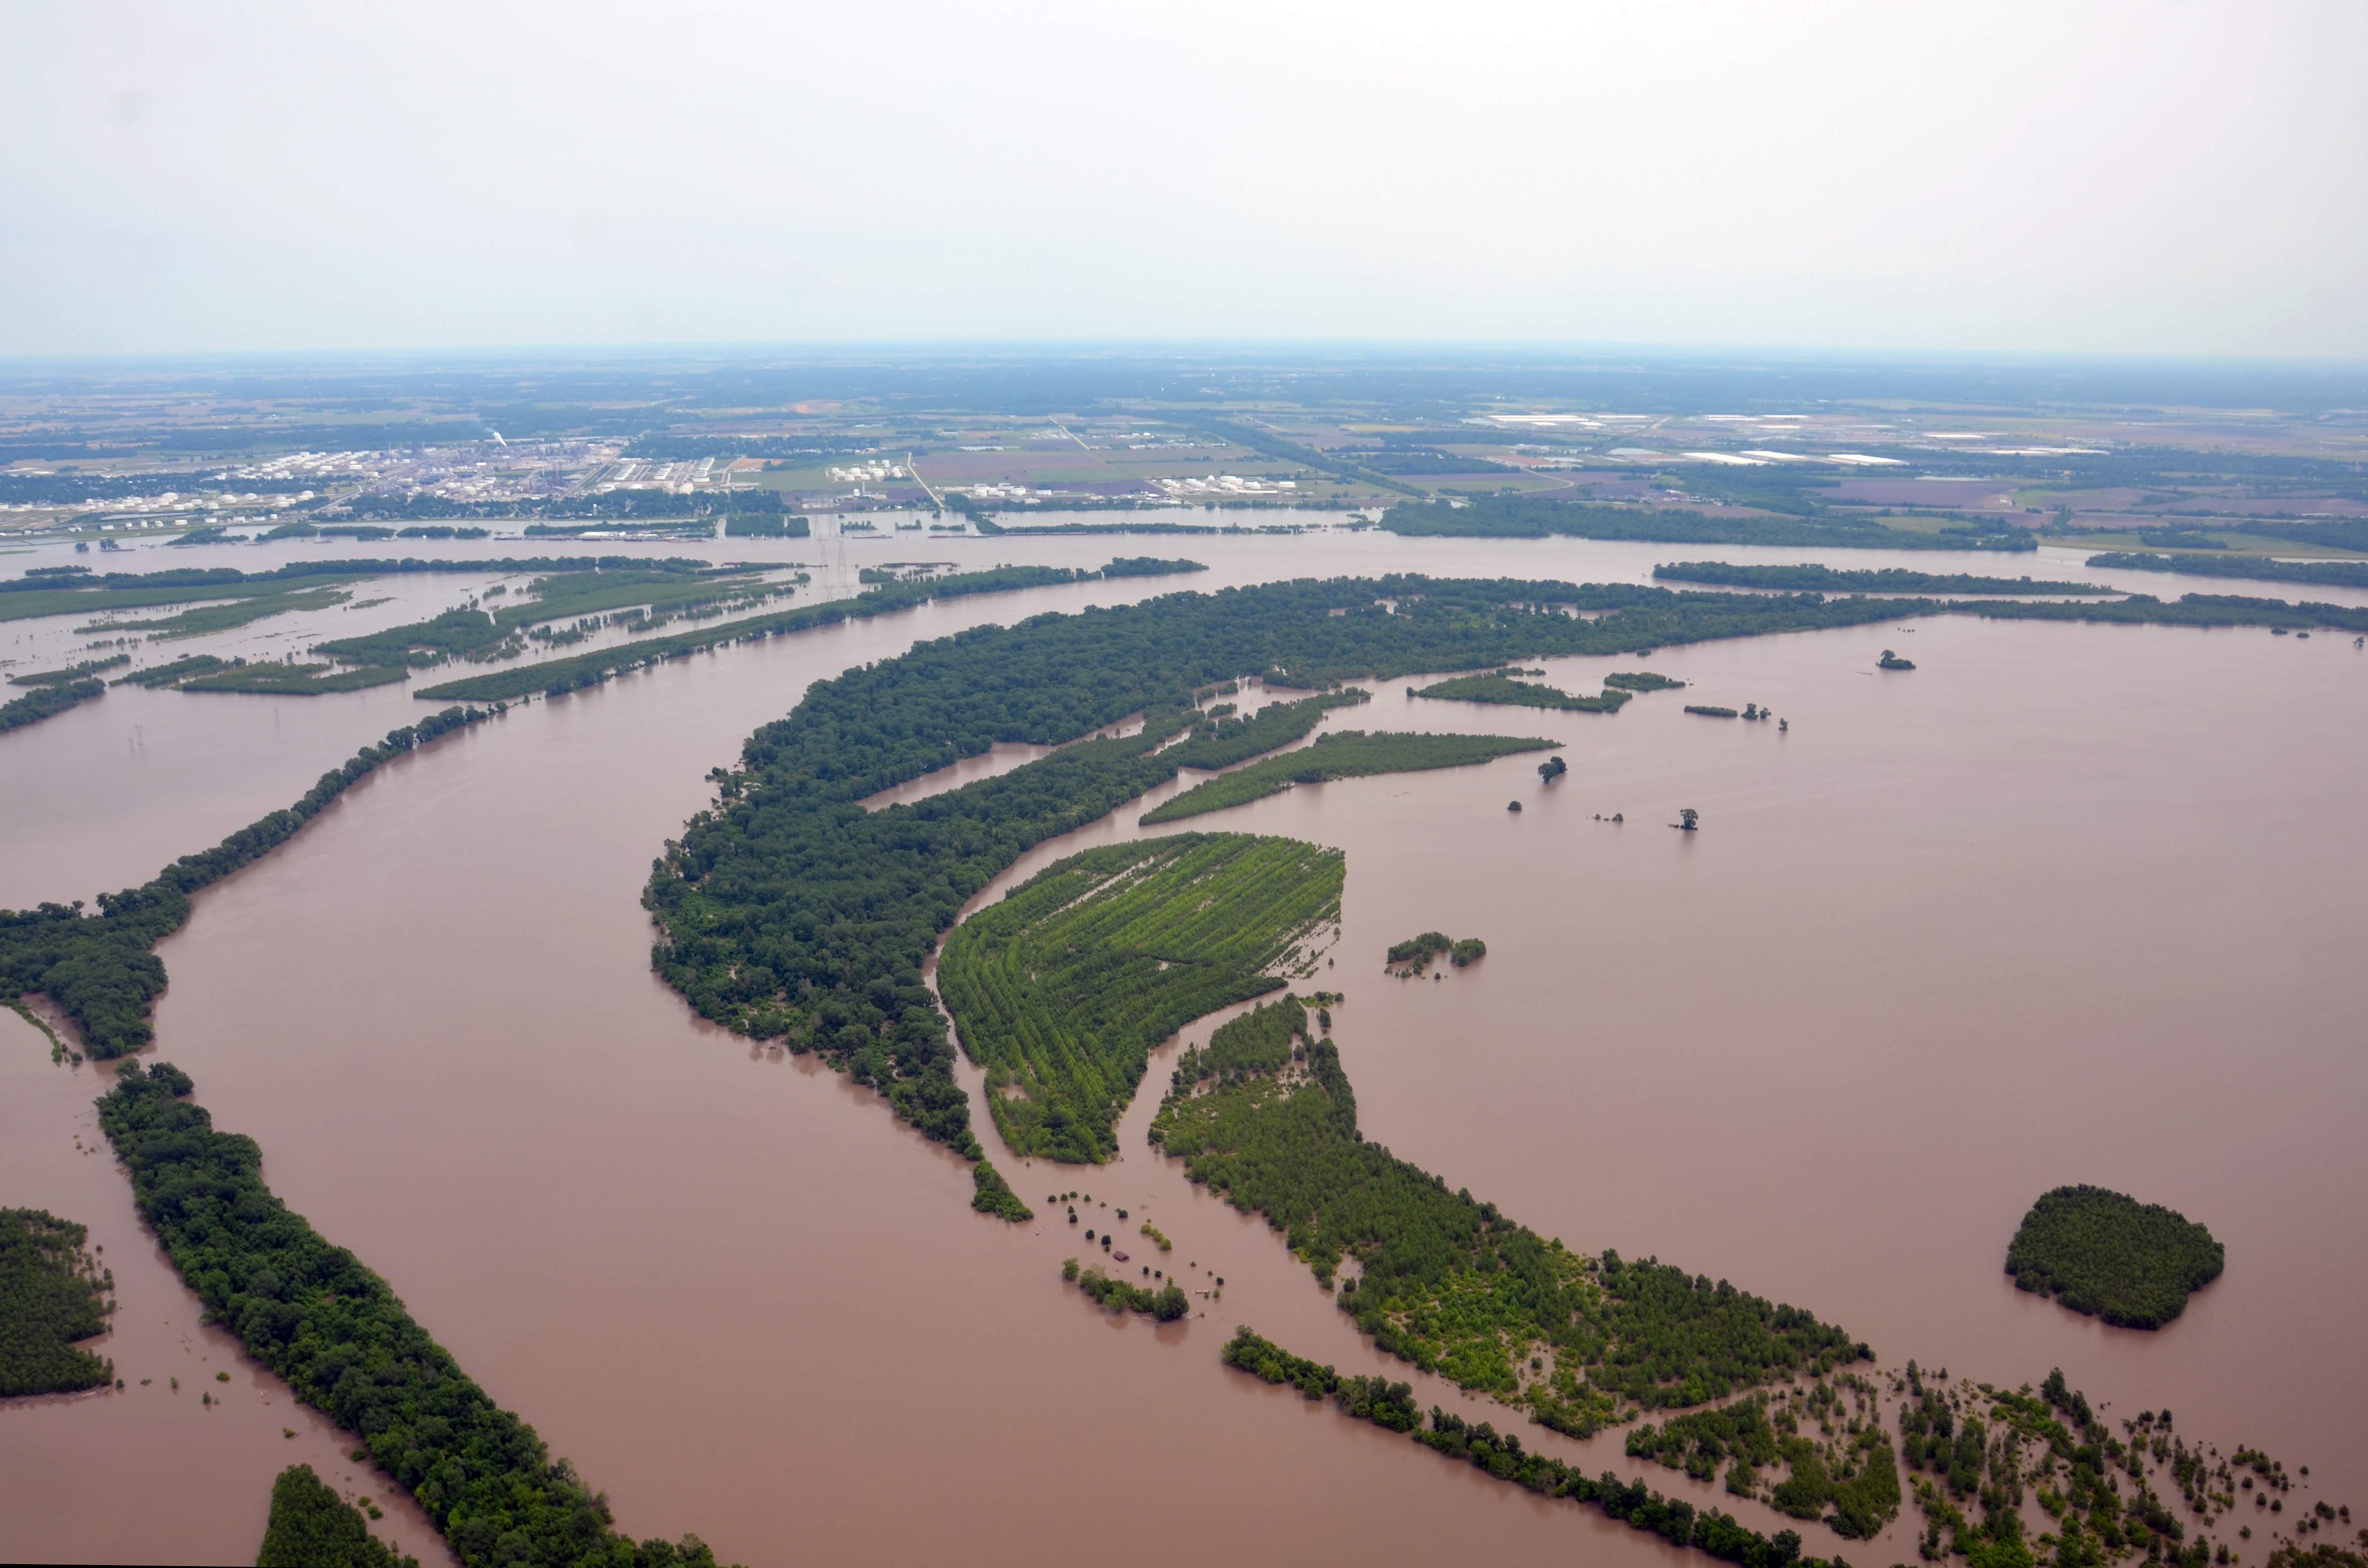 Confluence of the Missouri and Mississippi Rivers | Photo taken on June 3 by Derek Hoeferlin